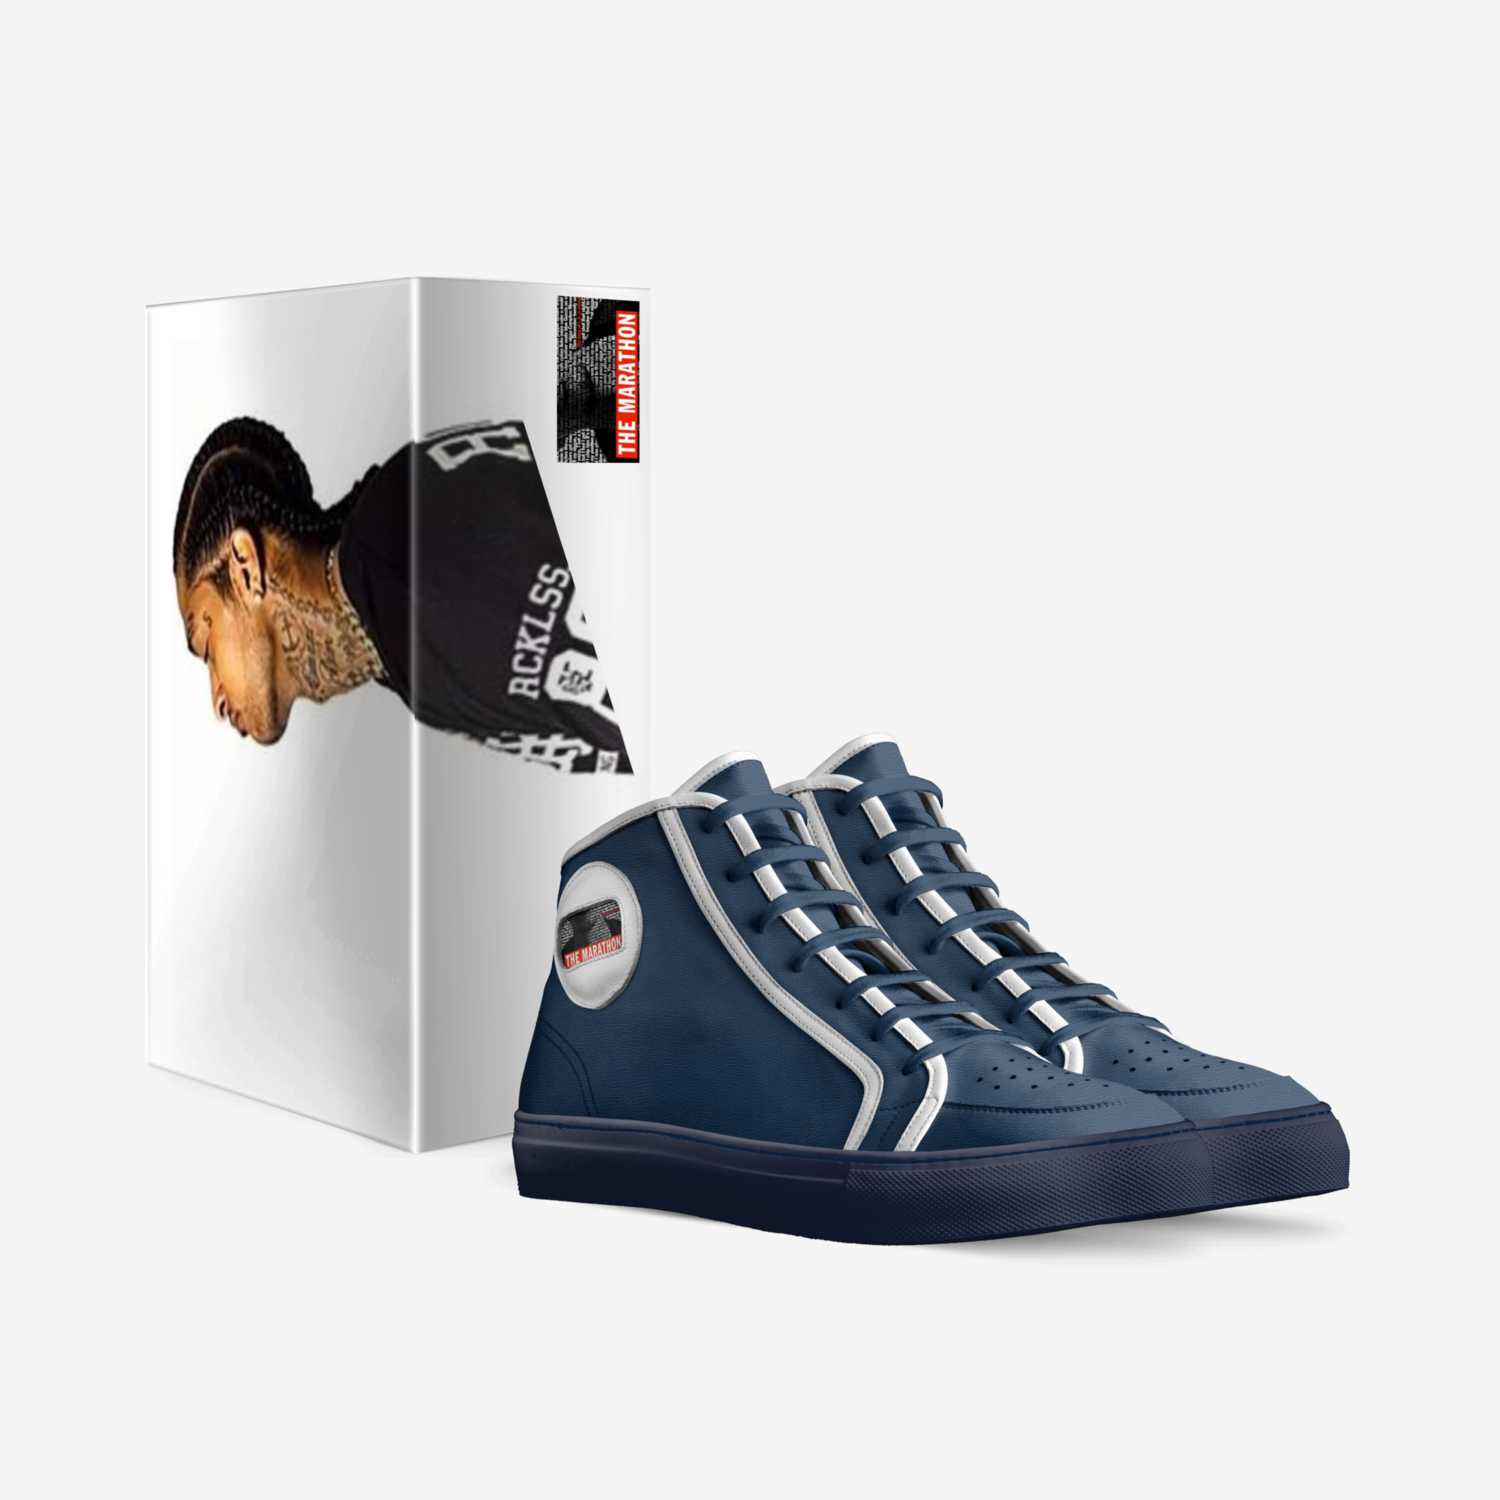 Bluegatchi Hussle custom made in Italy shoes by Braylon Richardson | Box view